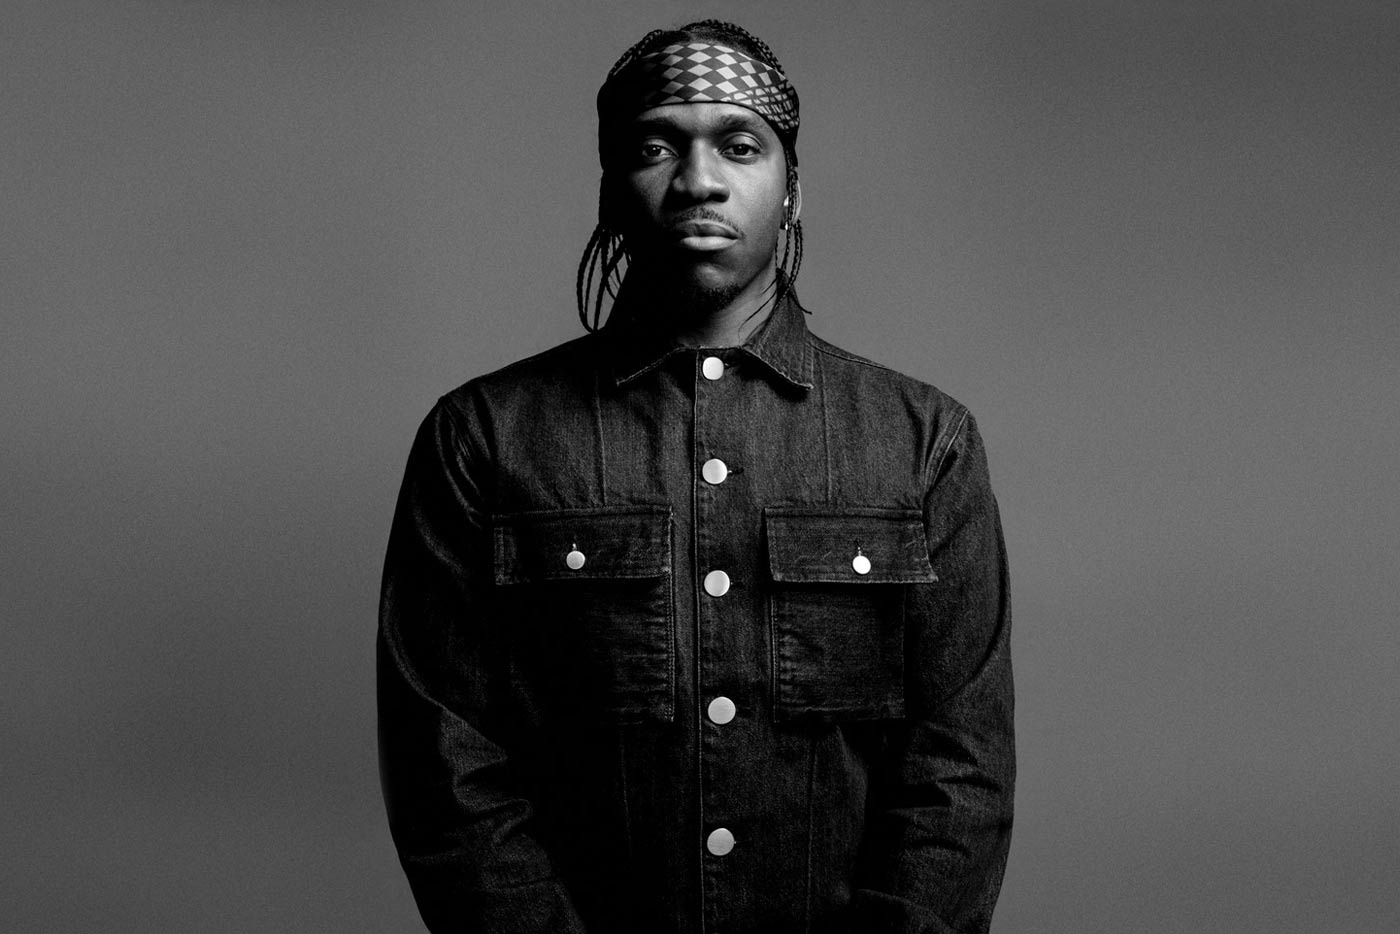 Pusha T y Jay Z lanzan "Drug Dealers Anonymous"